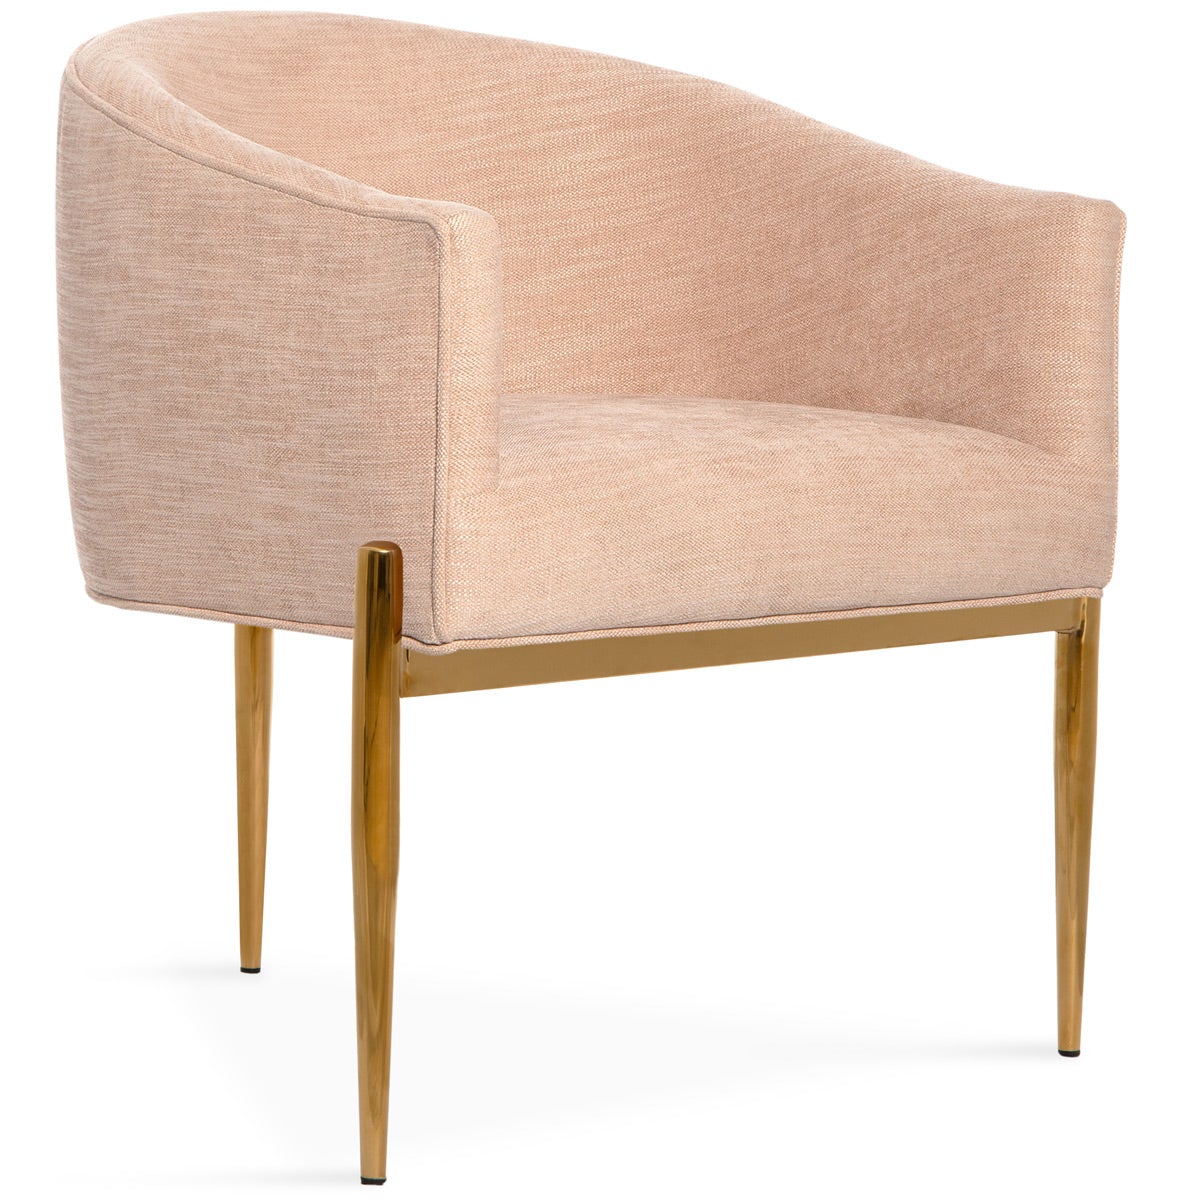 Art Deco style dining chair with three brass-colored legs and coral chenille upholstered seat, back and arms.